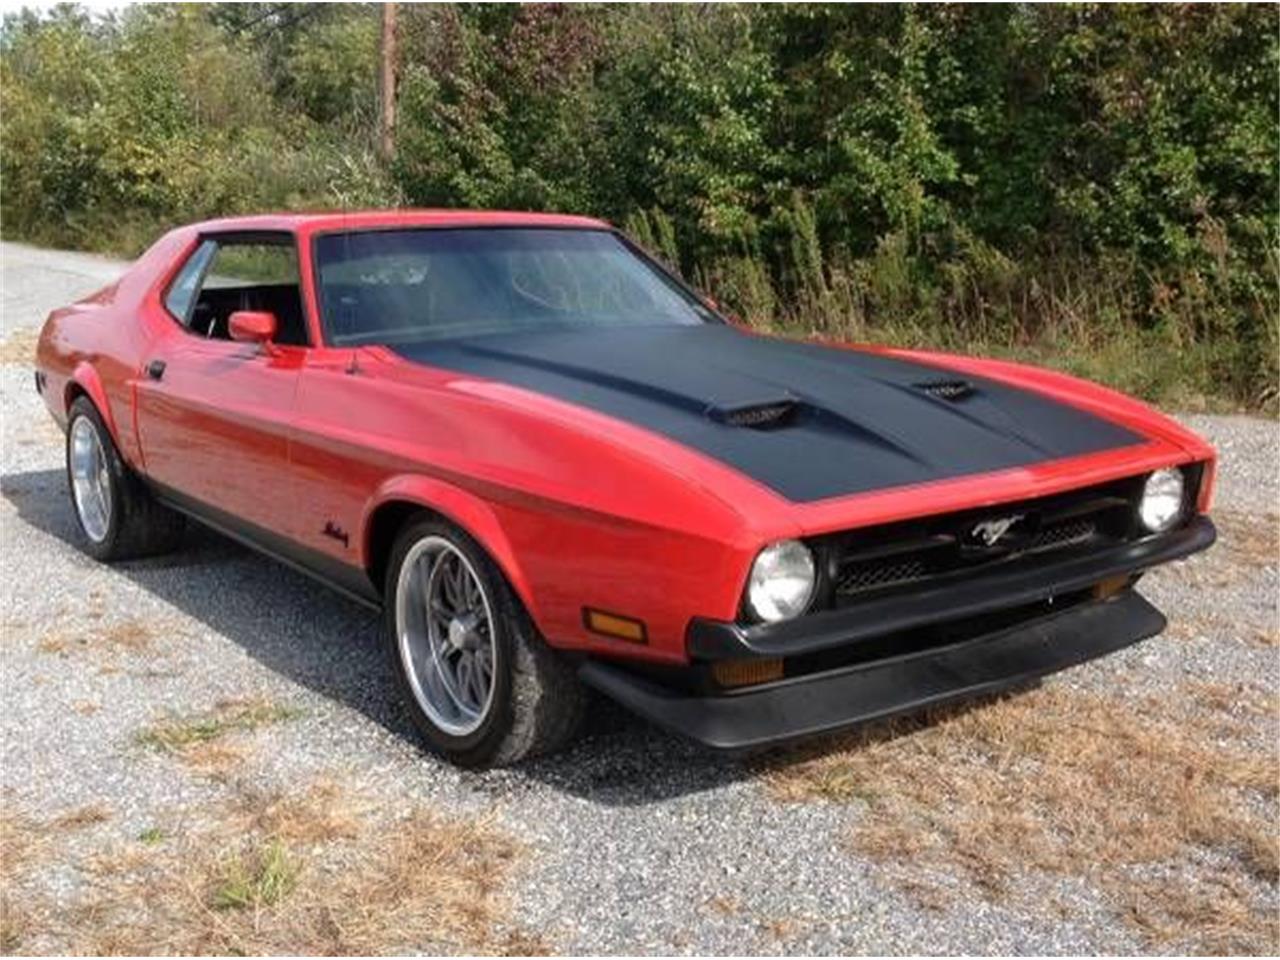 1972 Ford Mustang for Sale | ClassicCars.com | CC-1123629